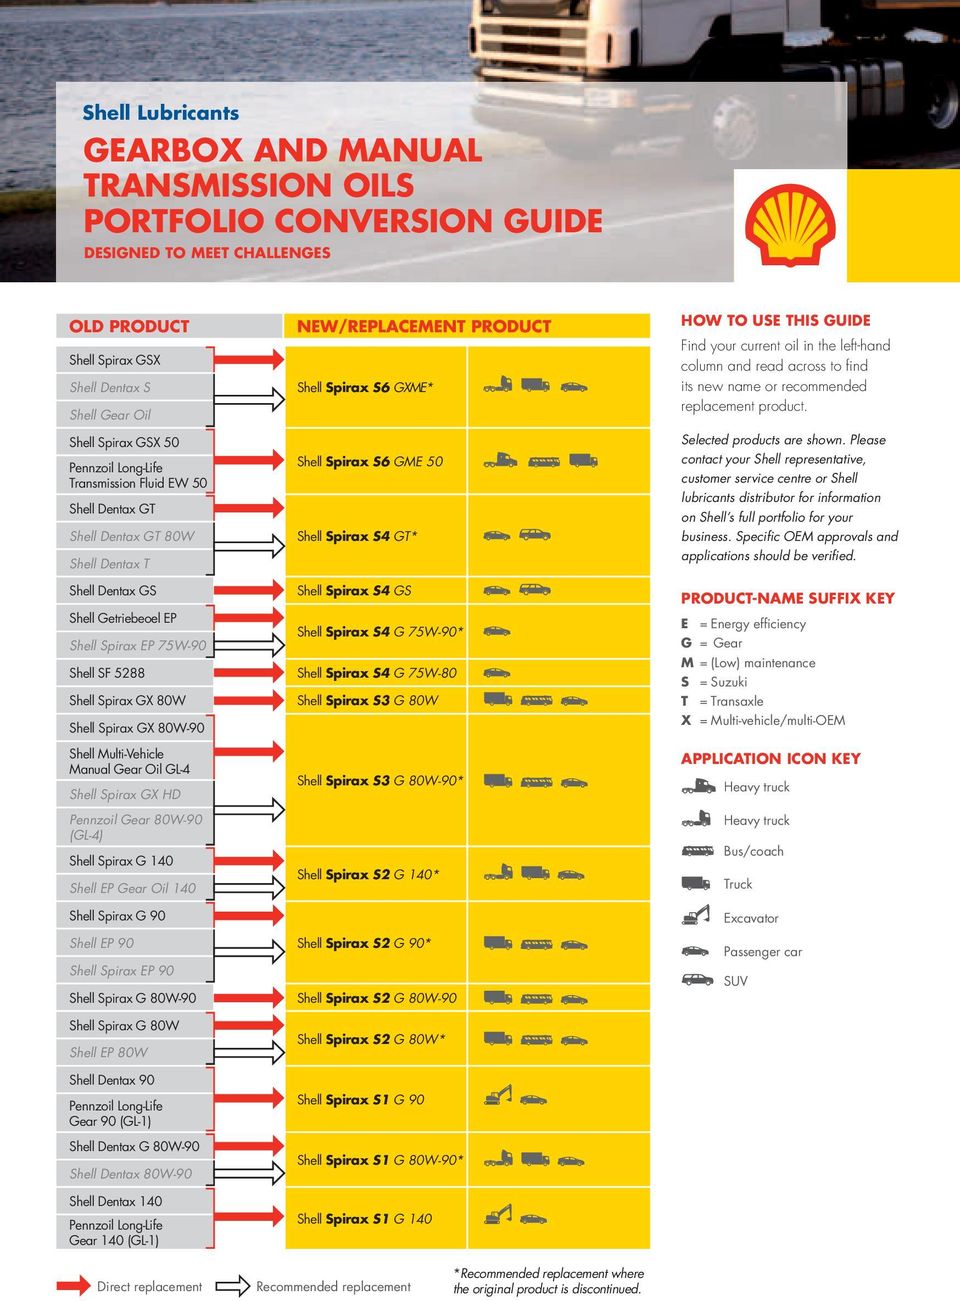 Please contact your Shell representative, customer service centre or Shell lubricants distributor for information on Shell s full portfolio for your business.